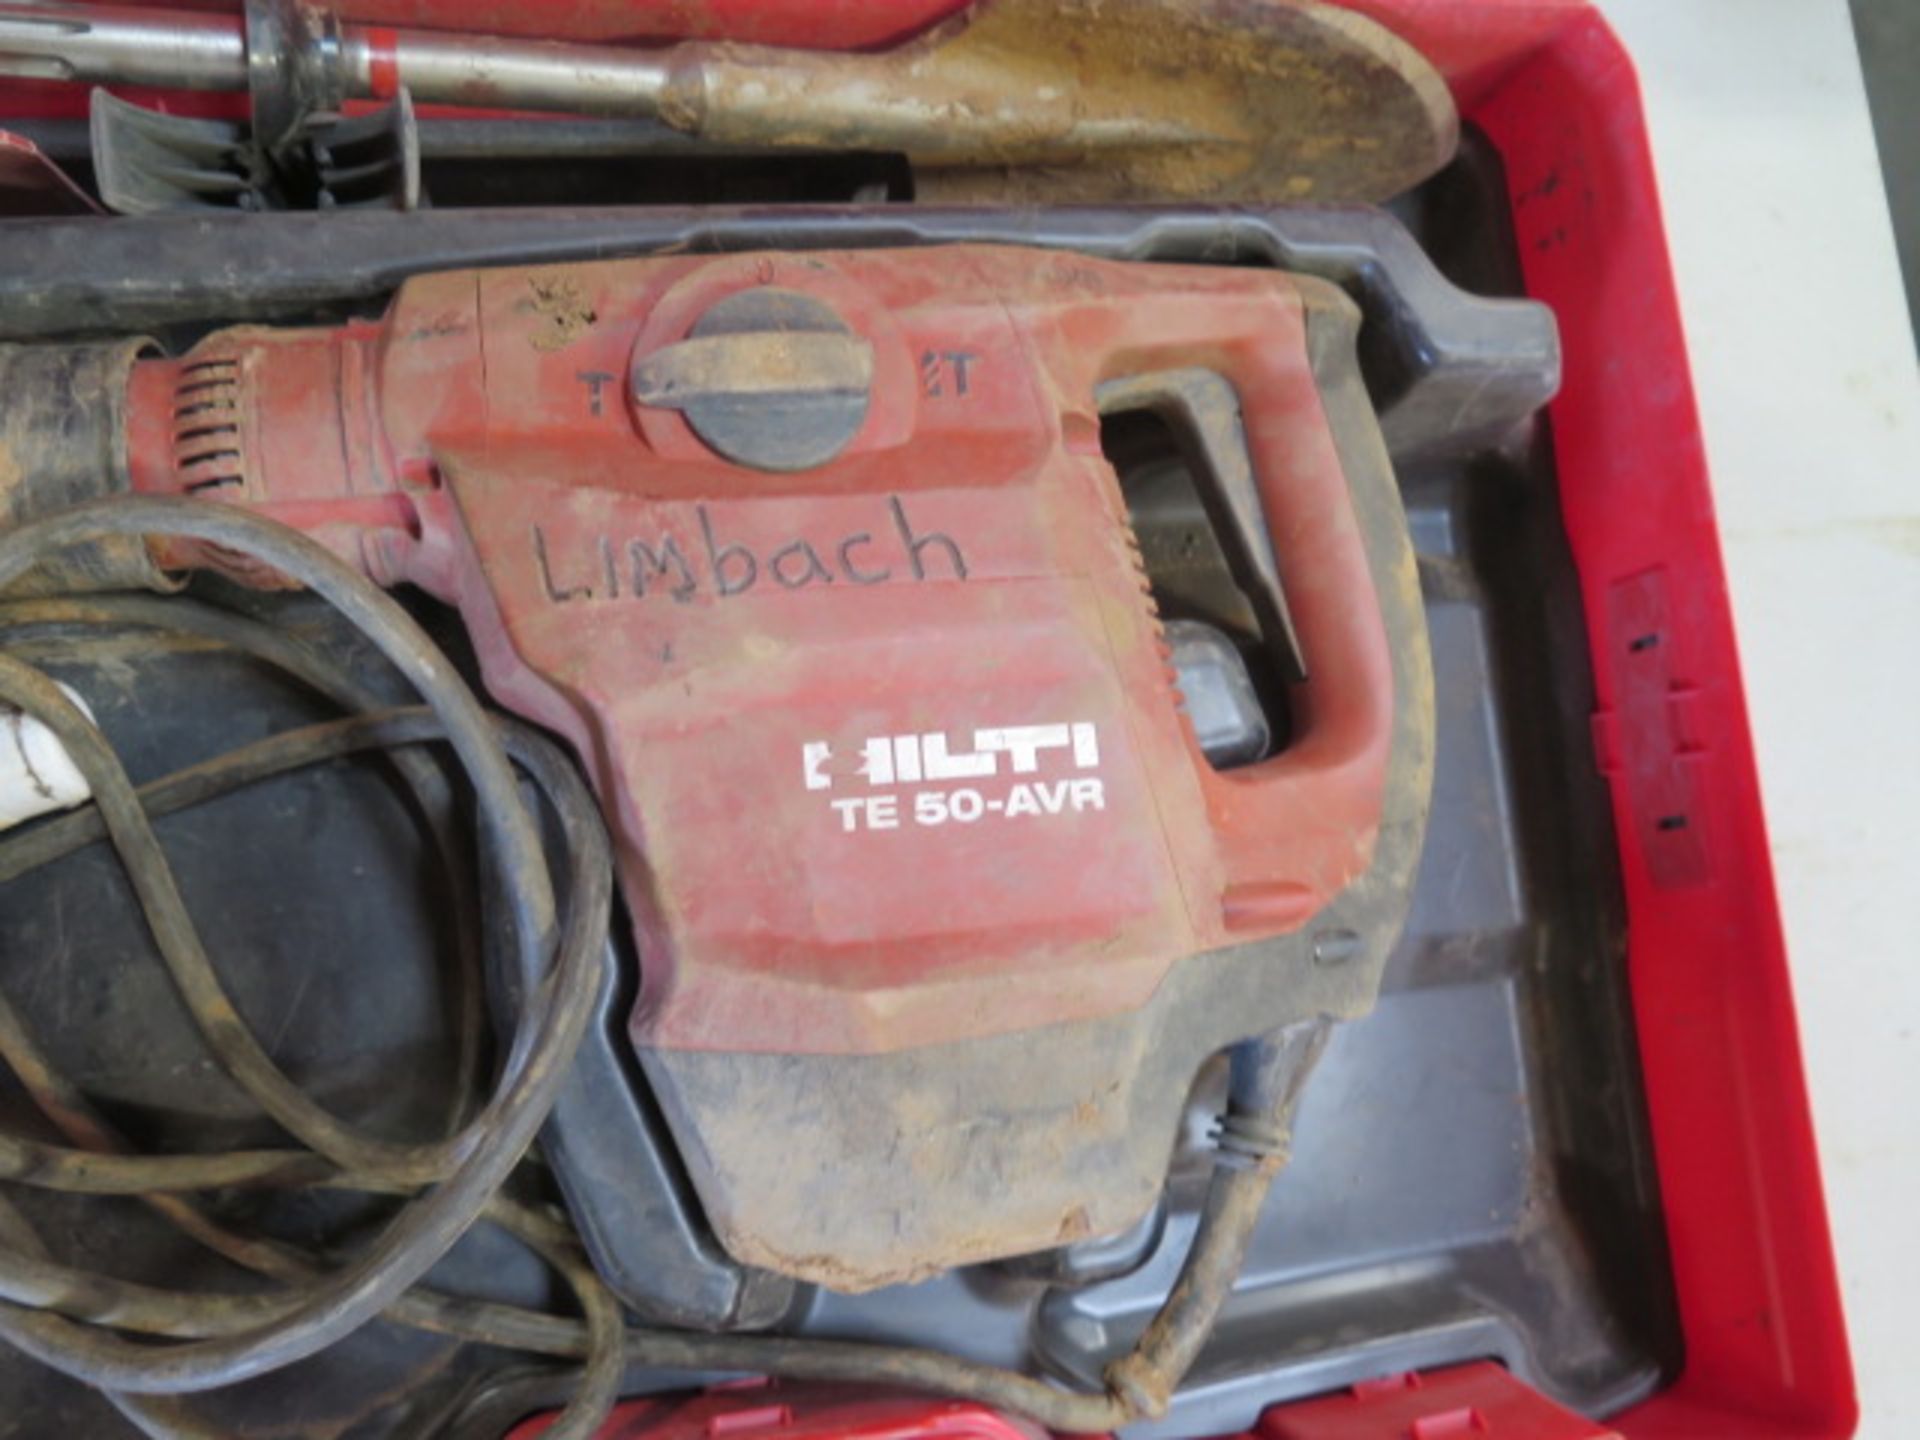 Hilti TE 50-AVR Hammer Drill (SOLD AS-IS - NO WARRANTY) - Image 5 of 6